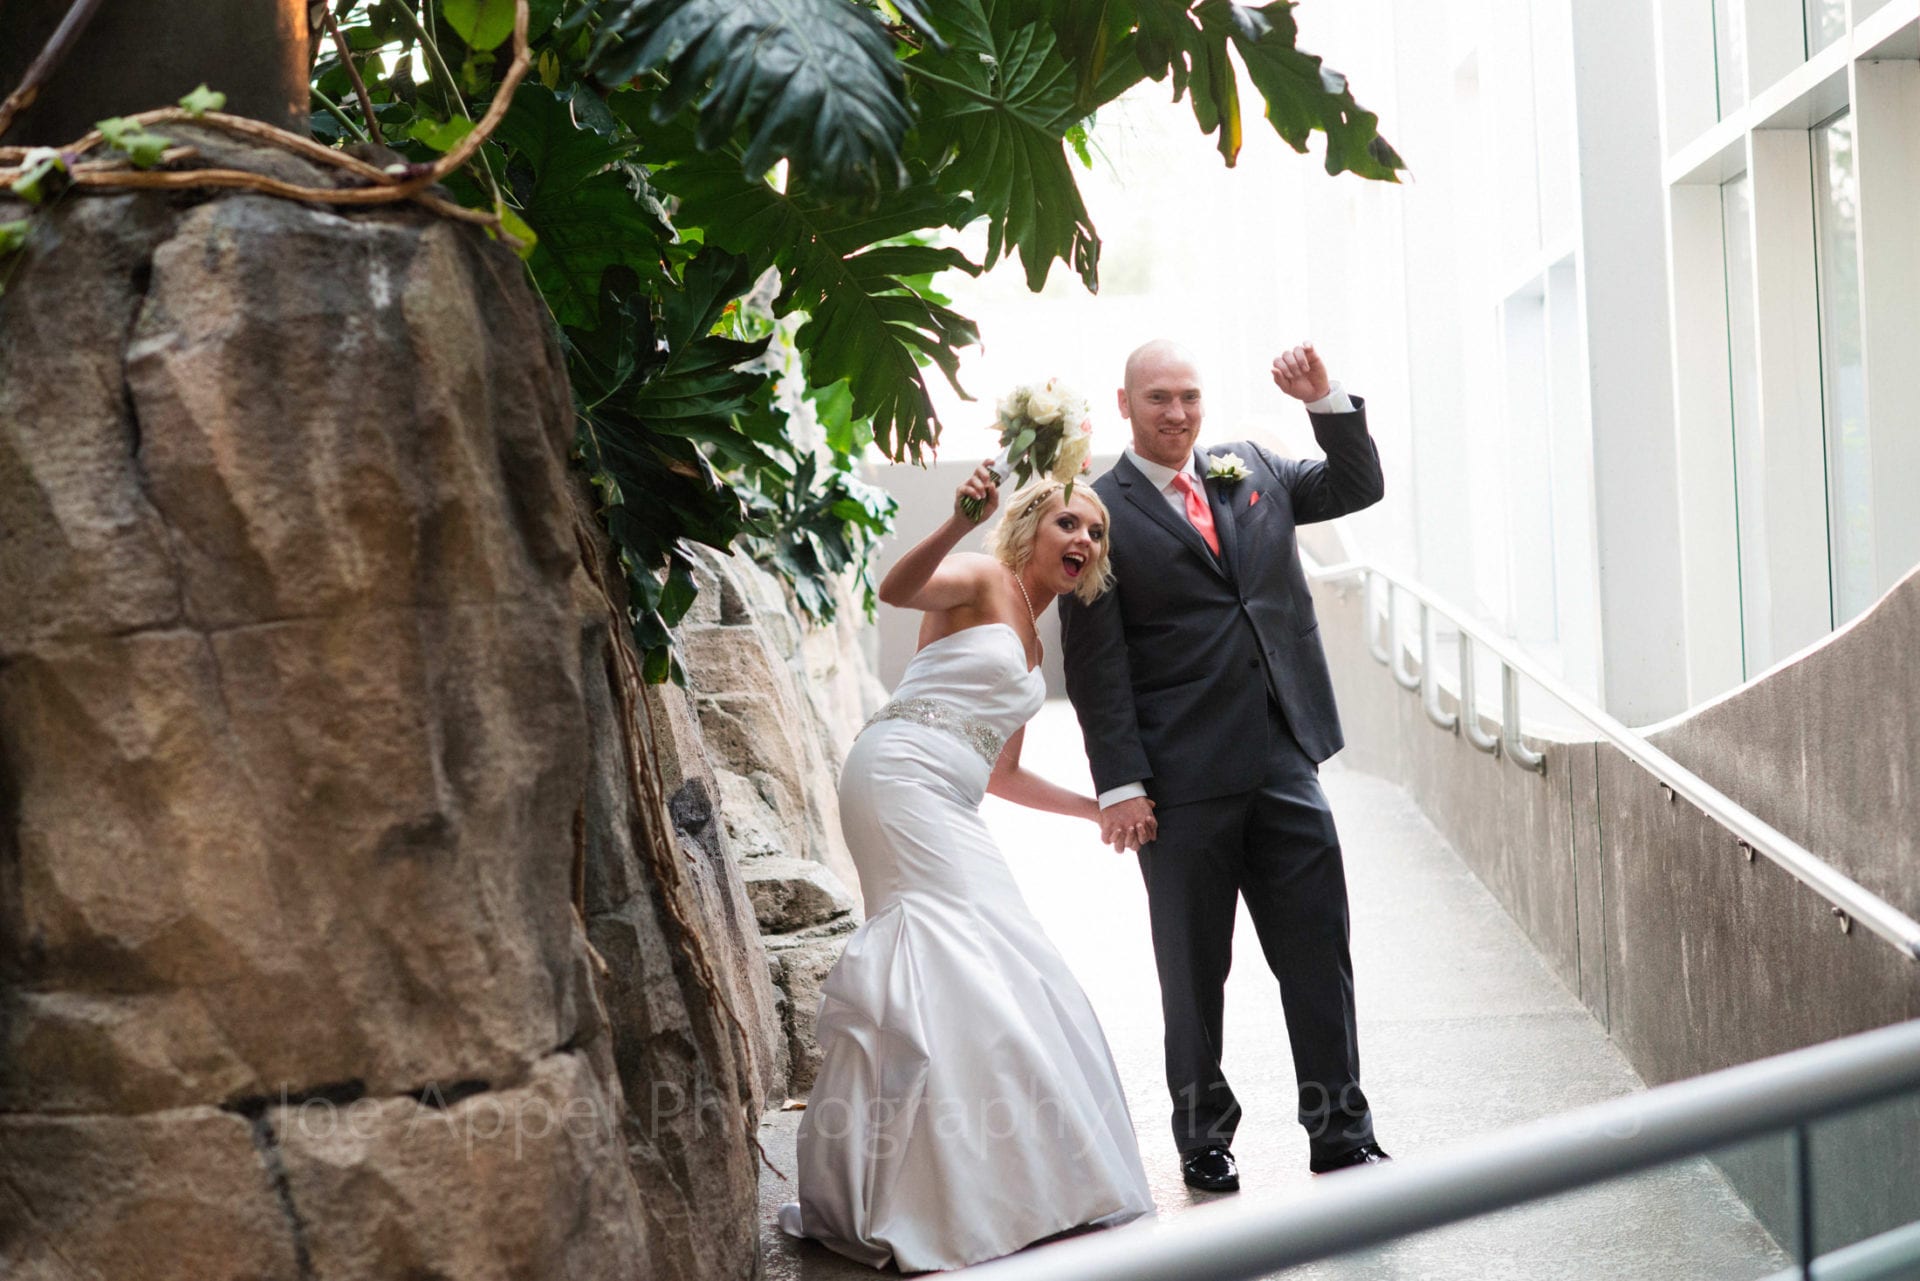 A bride and groom hold their hands in the air as they stand on a ramp at the PPG Aquarium when they are announced to their wedding reception.